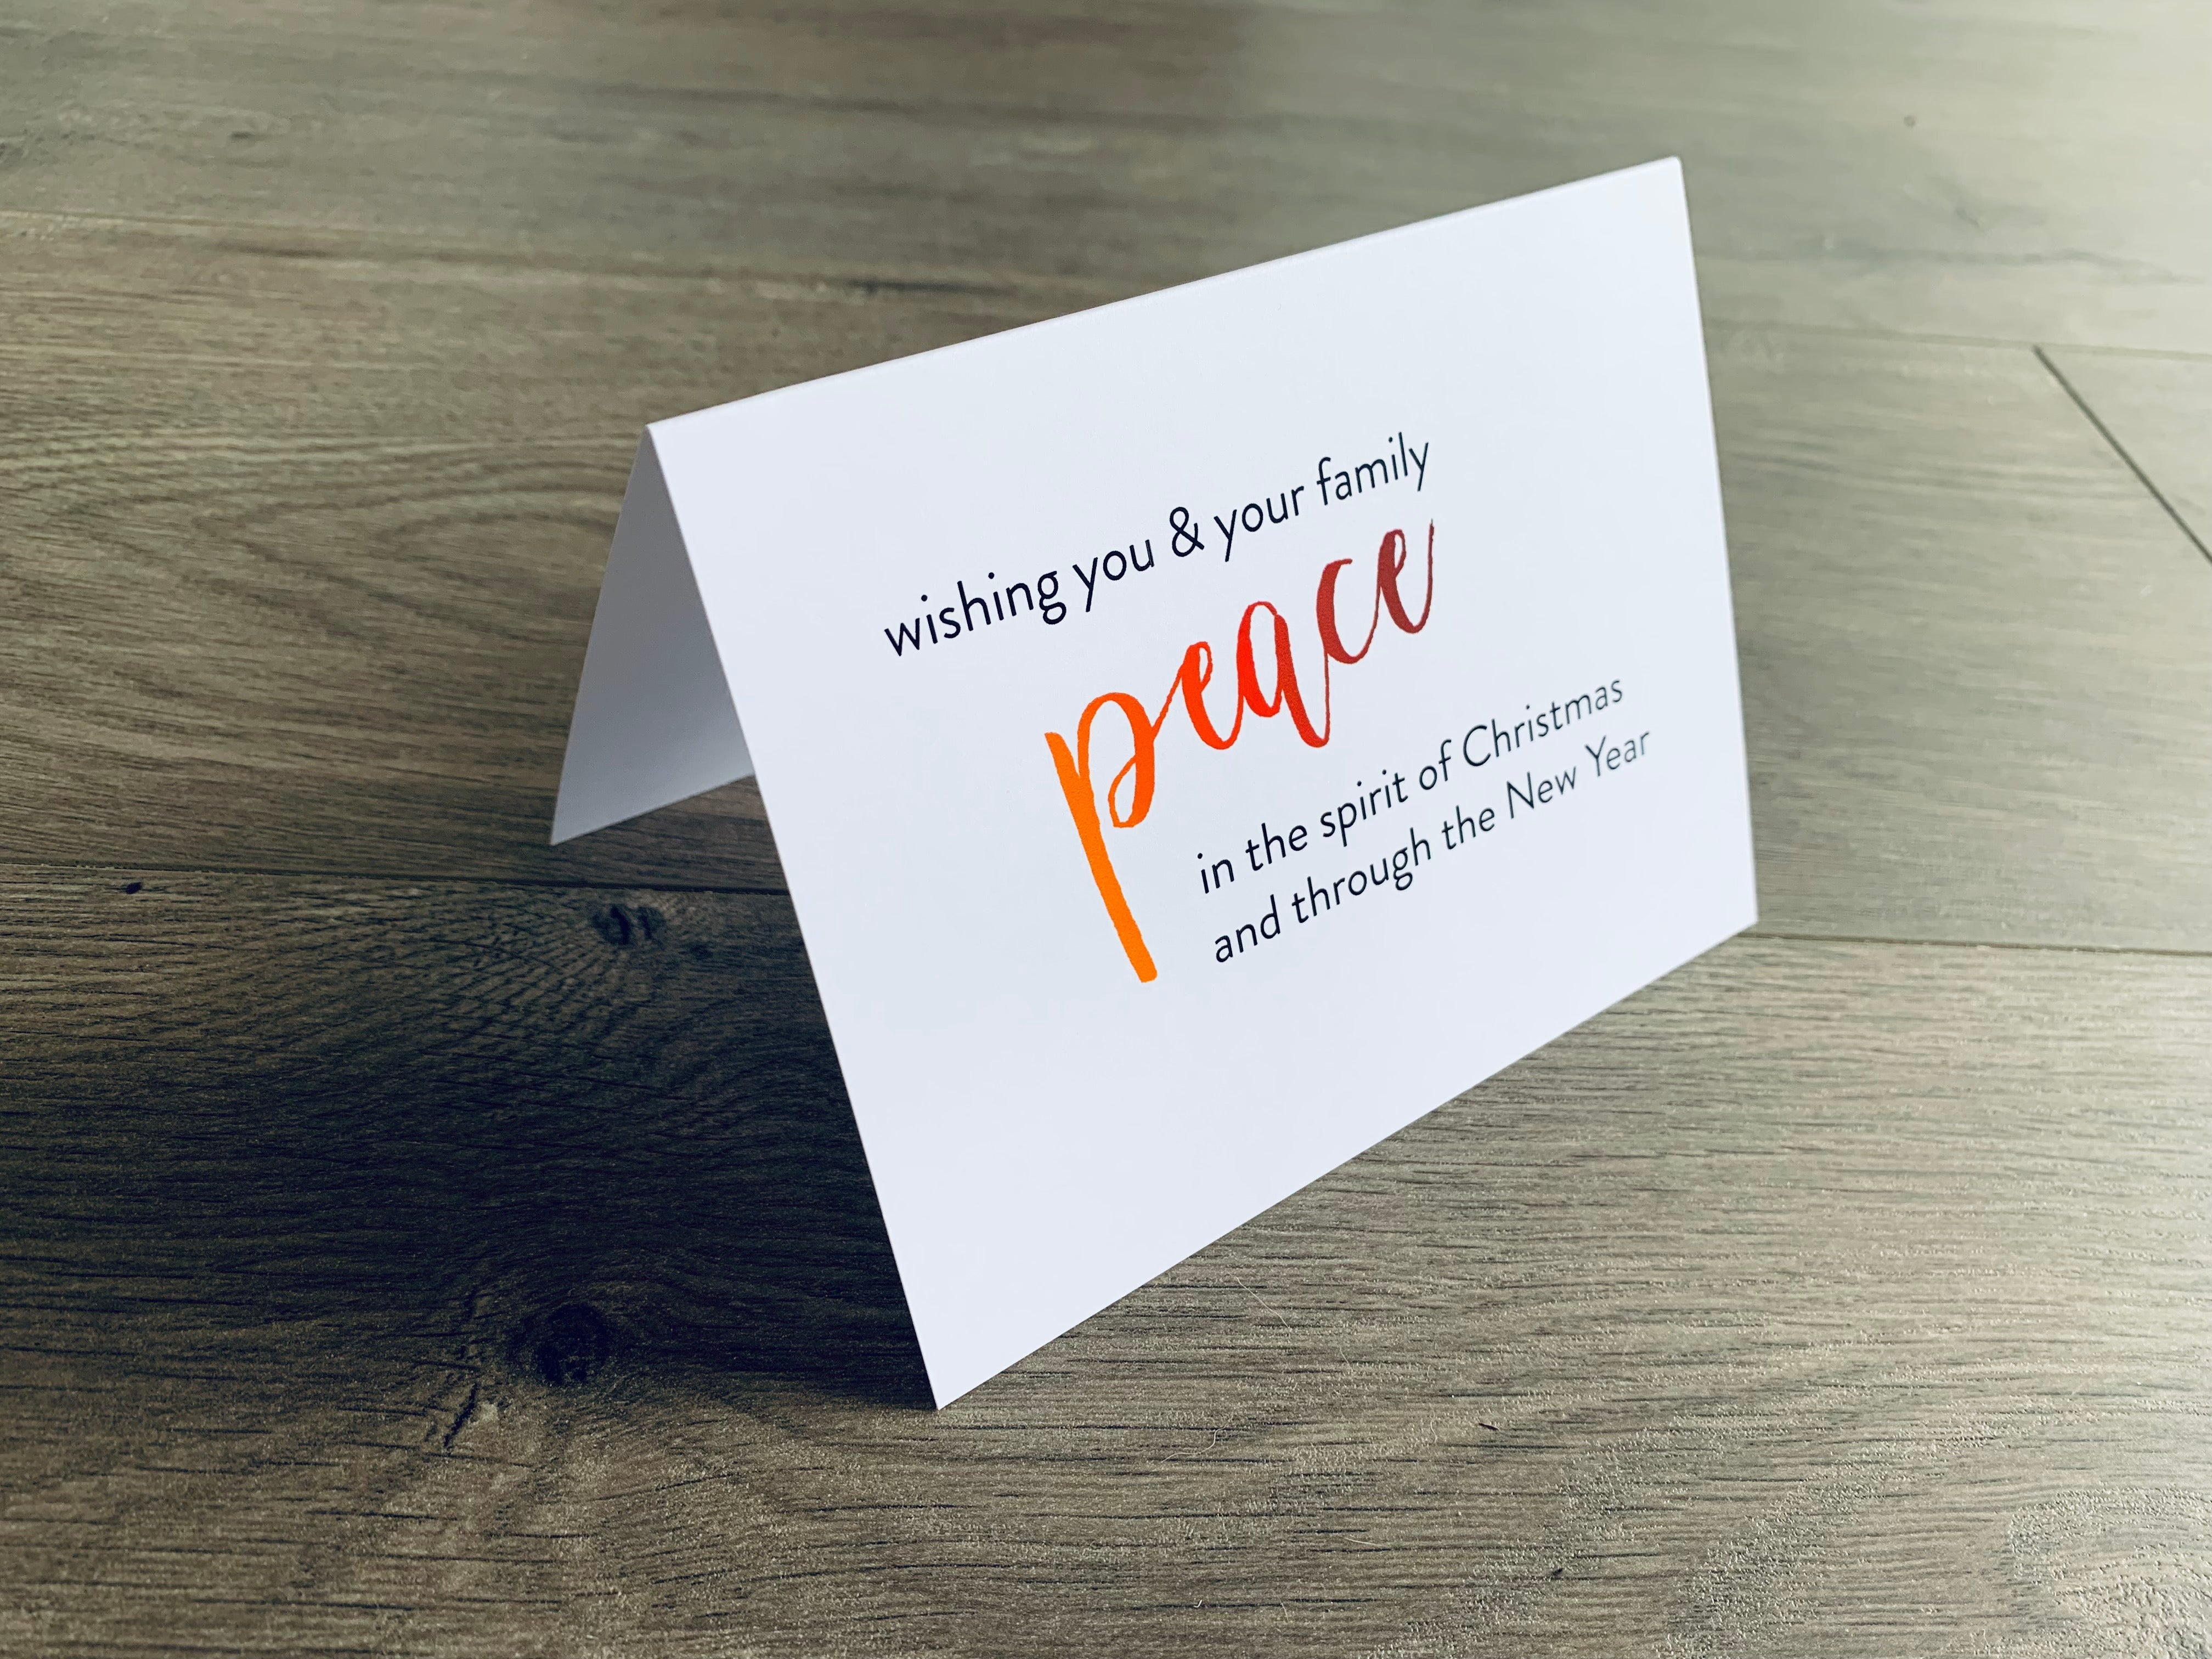 A white folded notecard is propped up on a wooden floor. The card says, "wishing you and your family peace in the spirit of Christmas and through the new year." From the Meaning of Christmas Collection by Stationare.